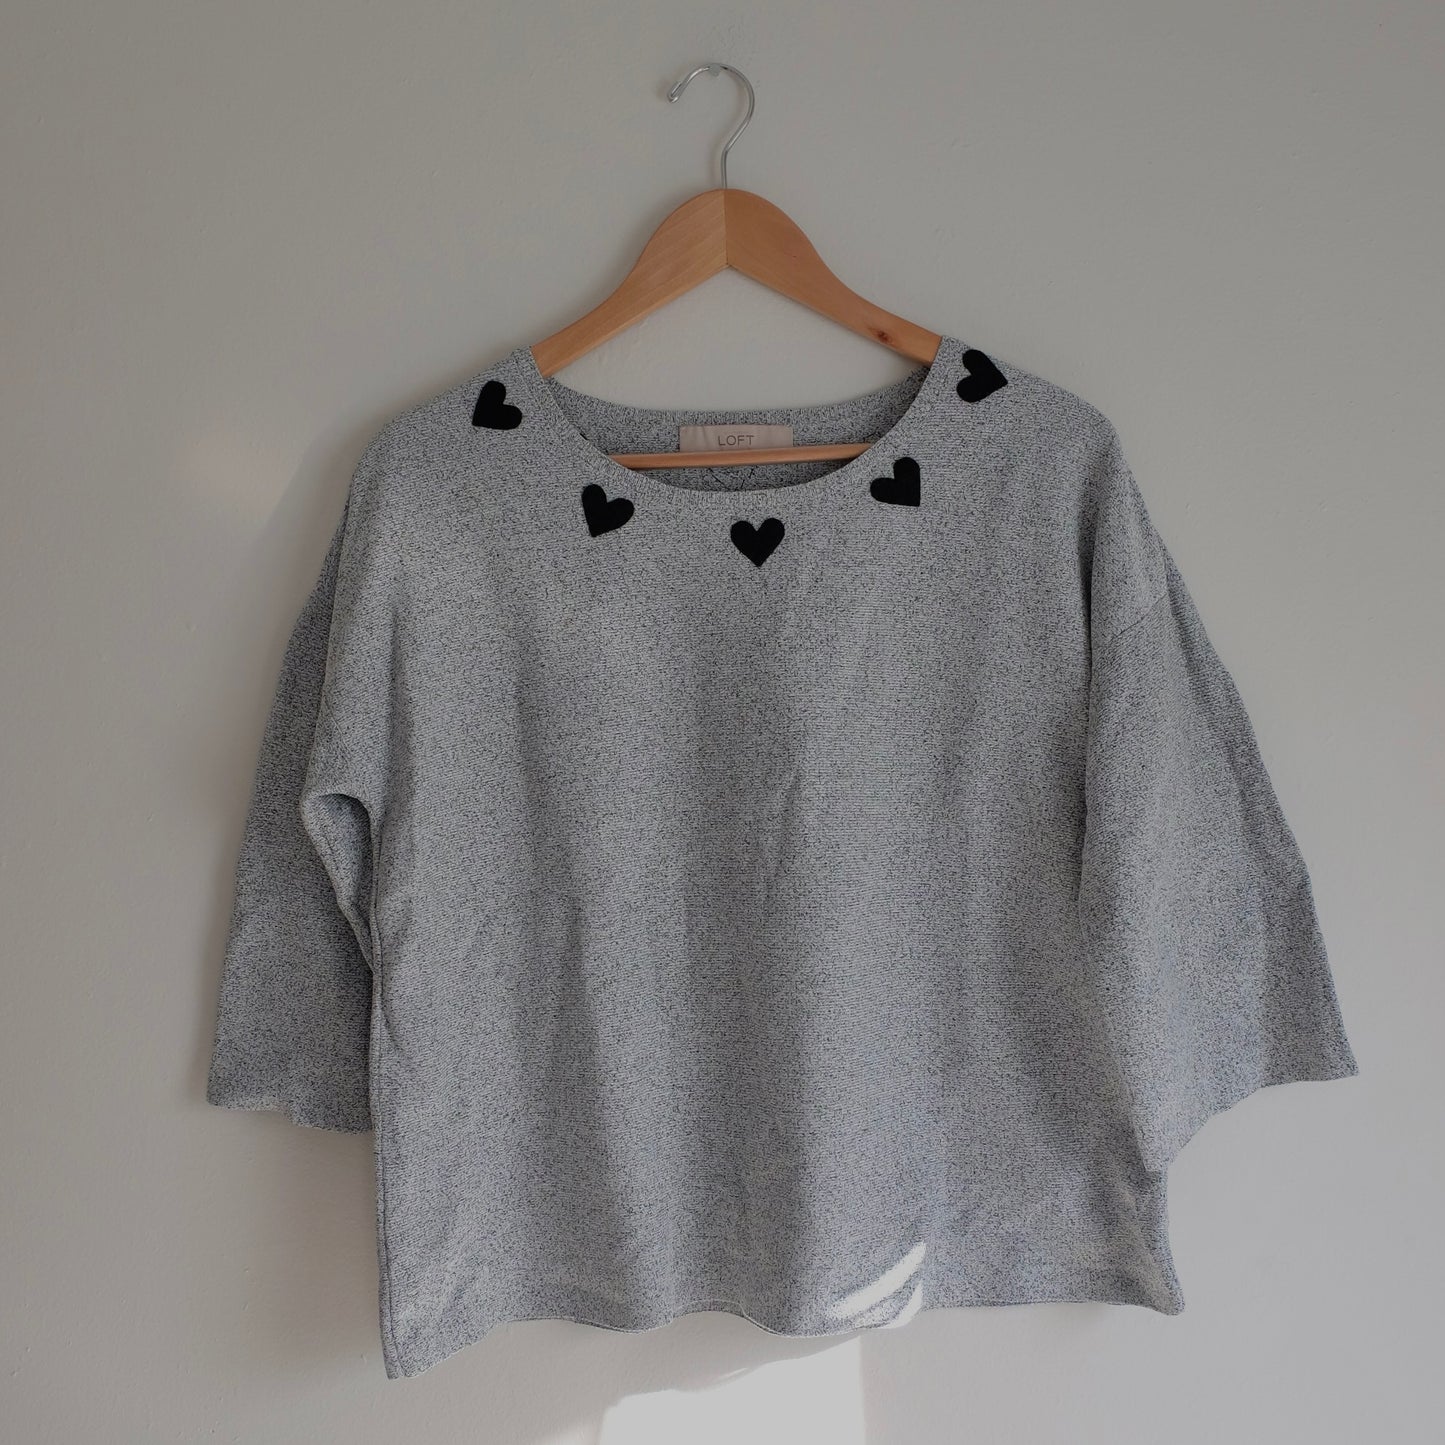 black and white 3/4 sleeve top